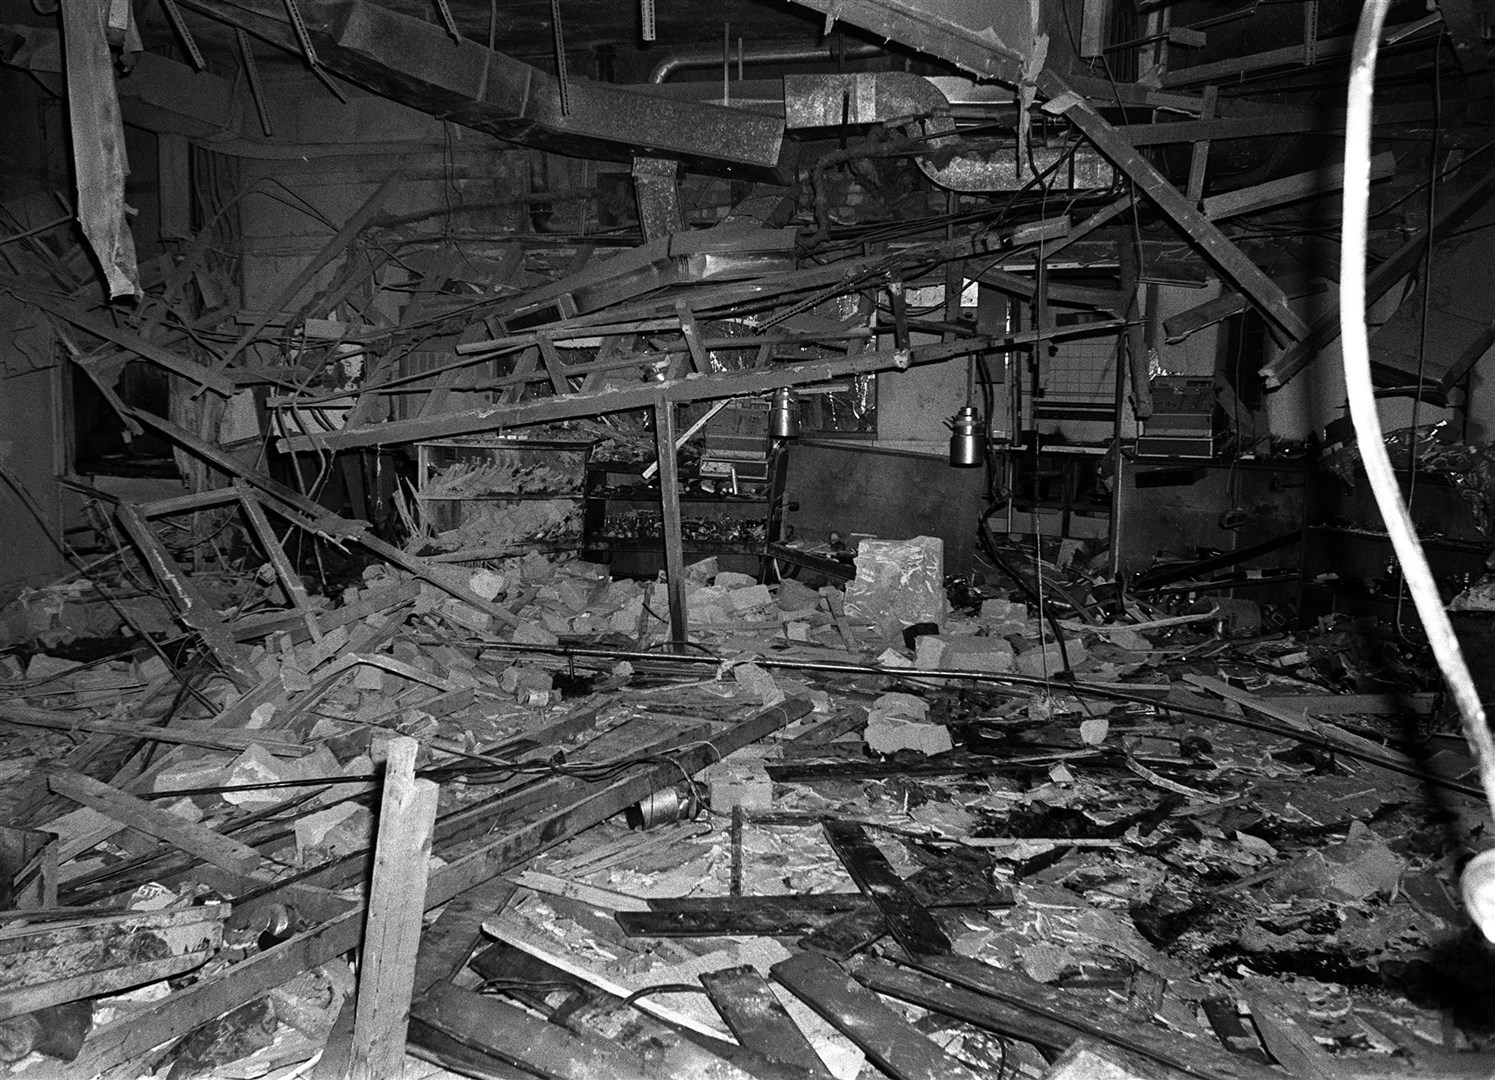 The remains of the Mulberry Bush pub in Birmingham on November 22, 1974. Next year marks the 50th anniversary of the attacks (PA)